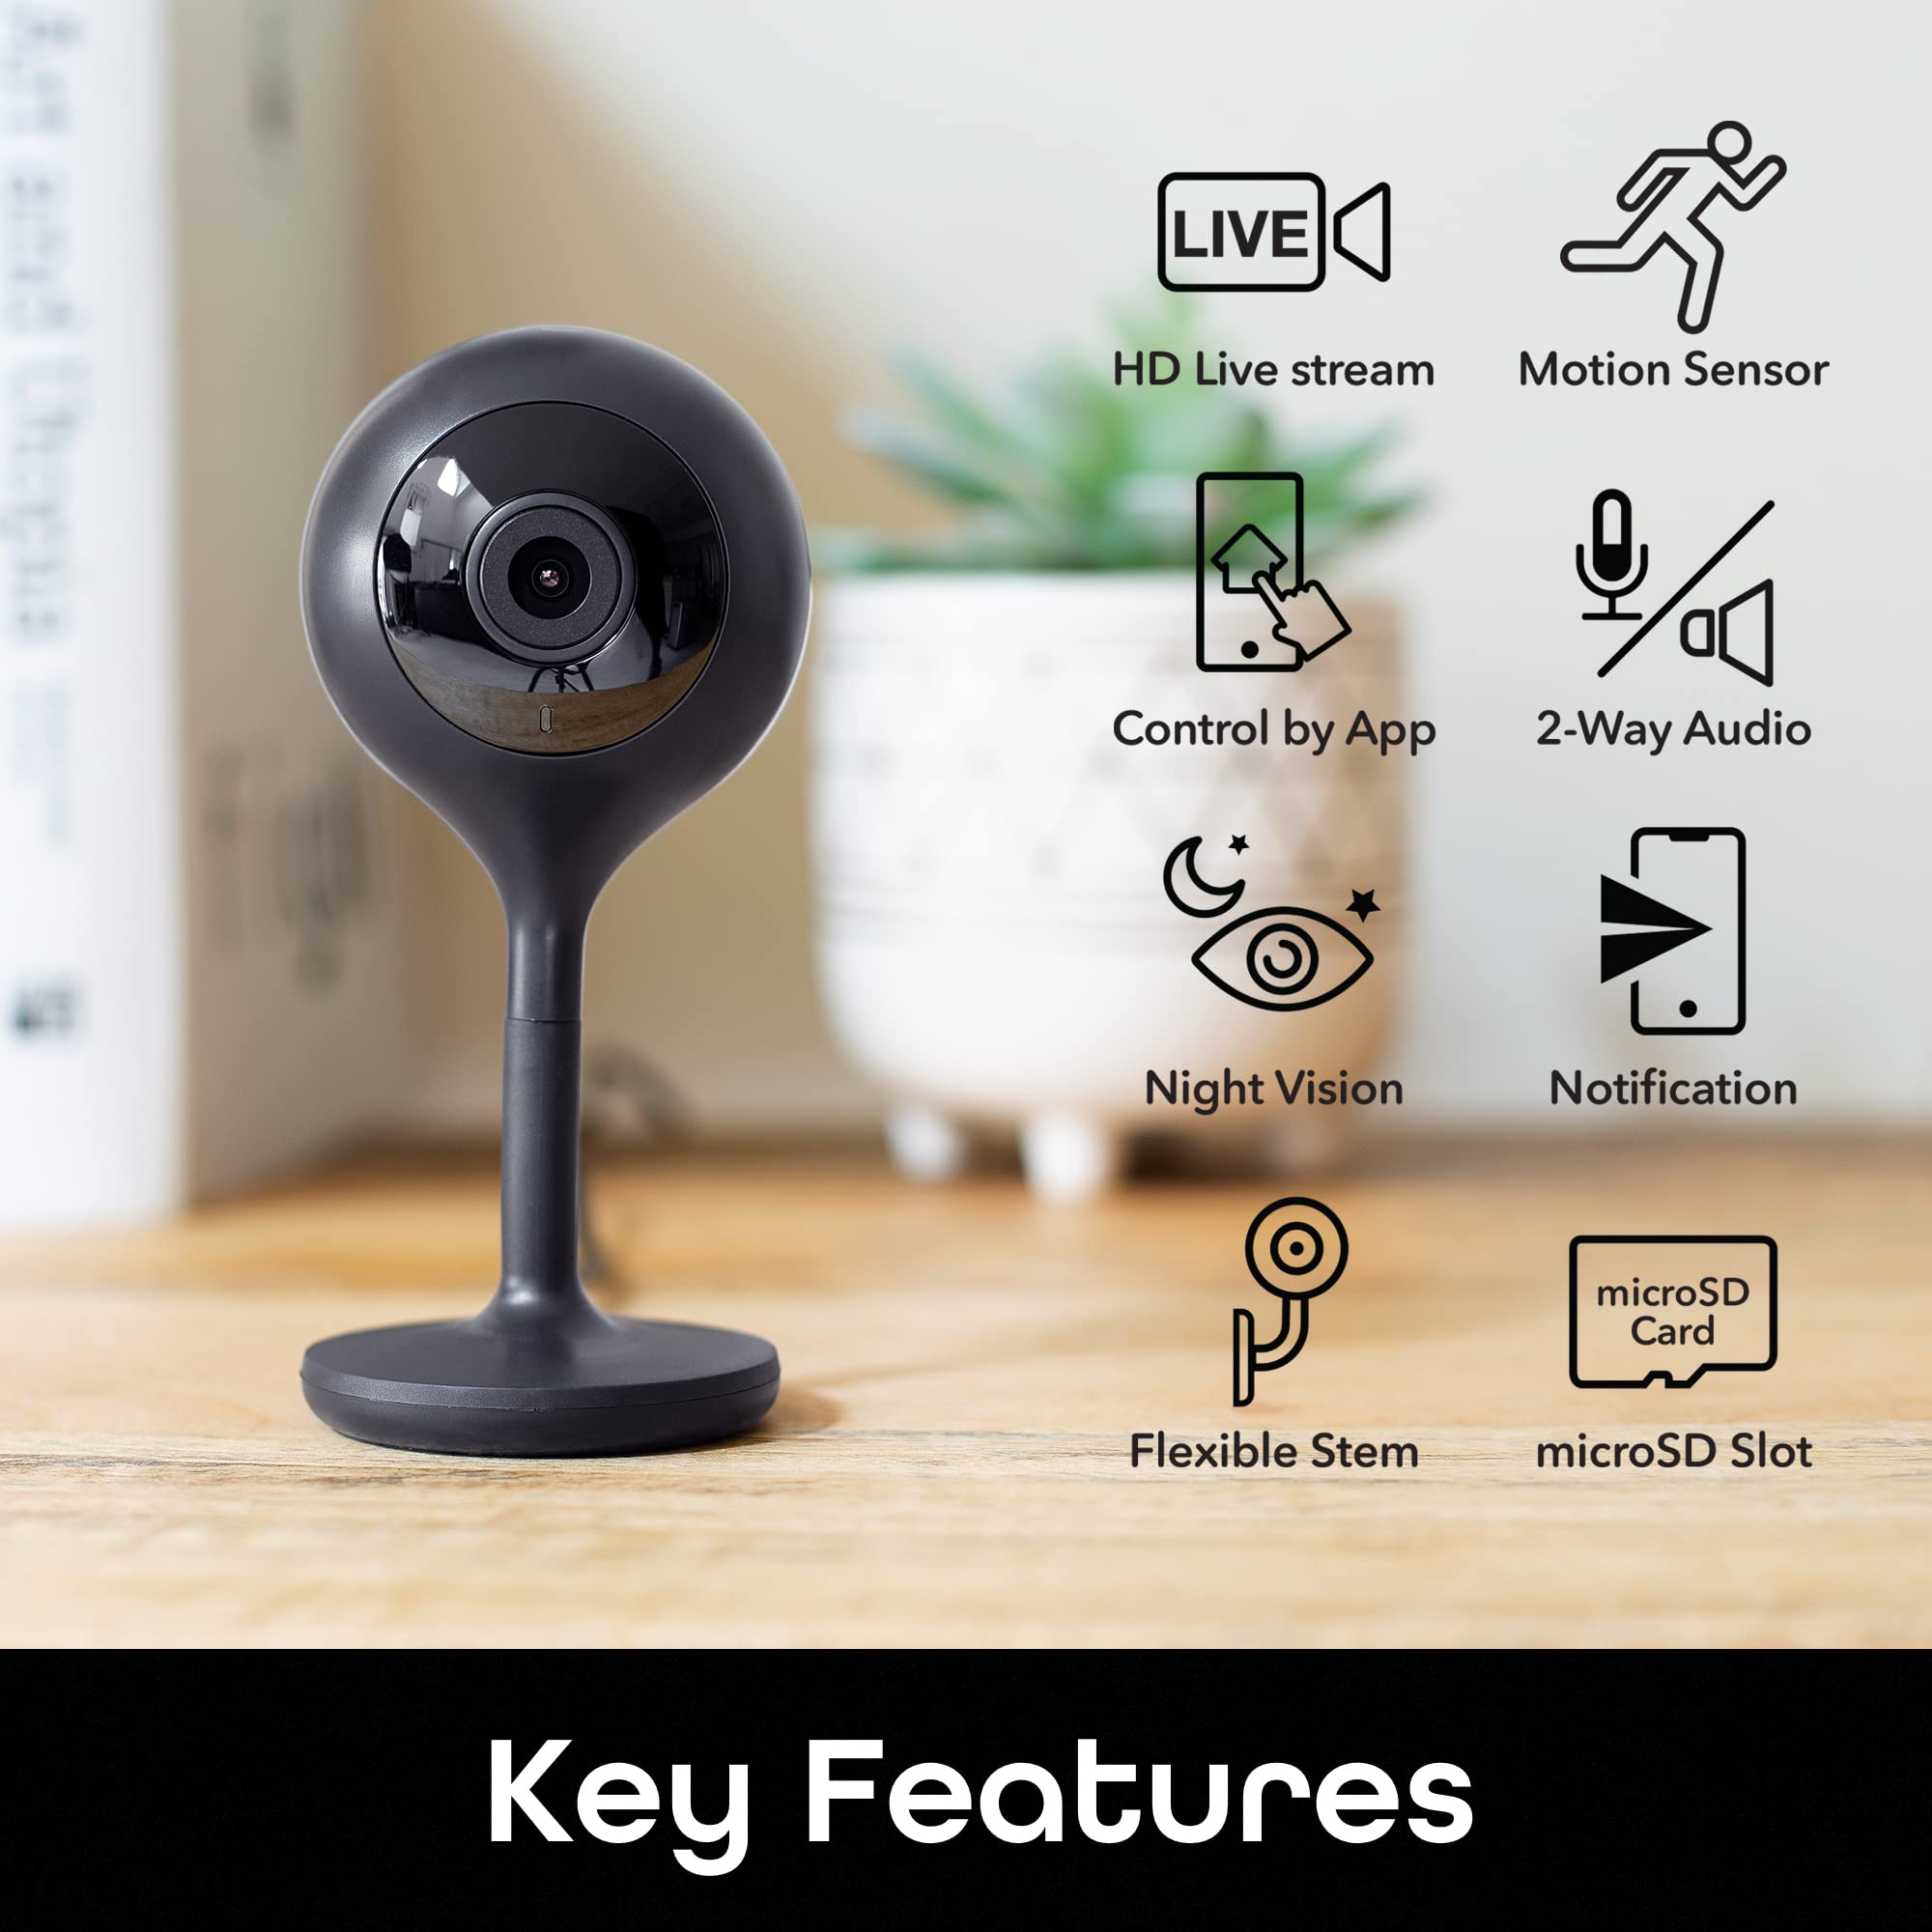 Geeni Look Indoor Smart Security Camera, 1080p HD Surveillance with 2-Way Talk and Motion Sensor, Works with Alexa and Google Home, No Hub Required, Black (2 Pack)